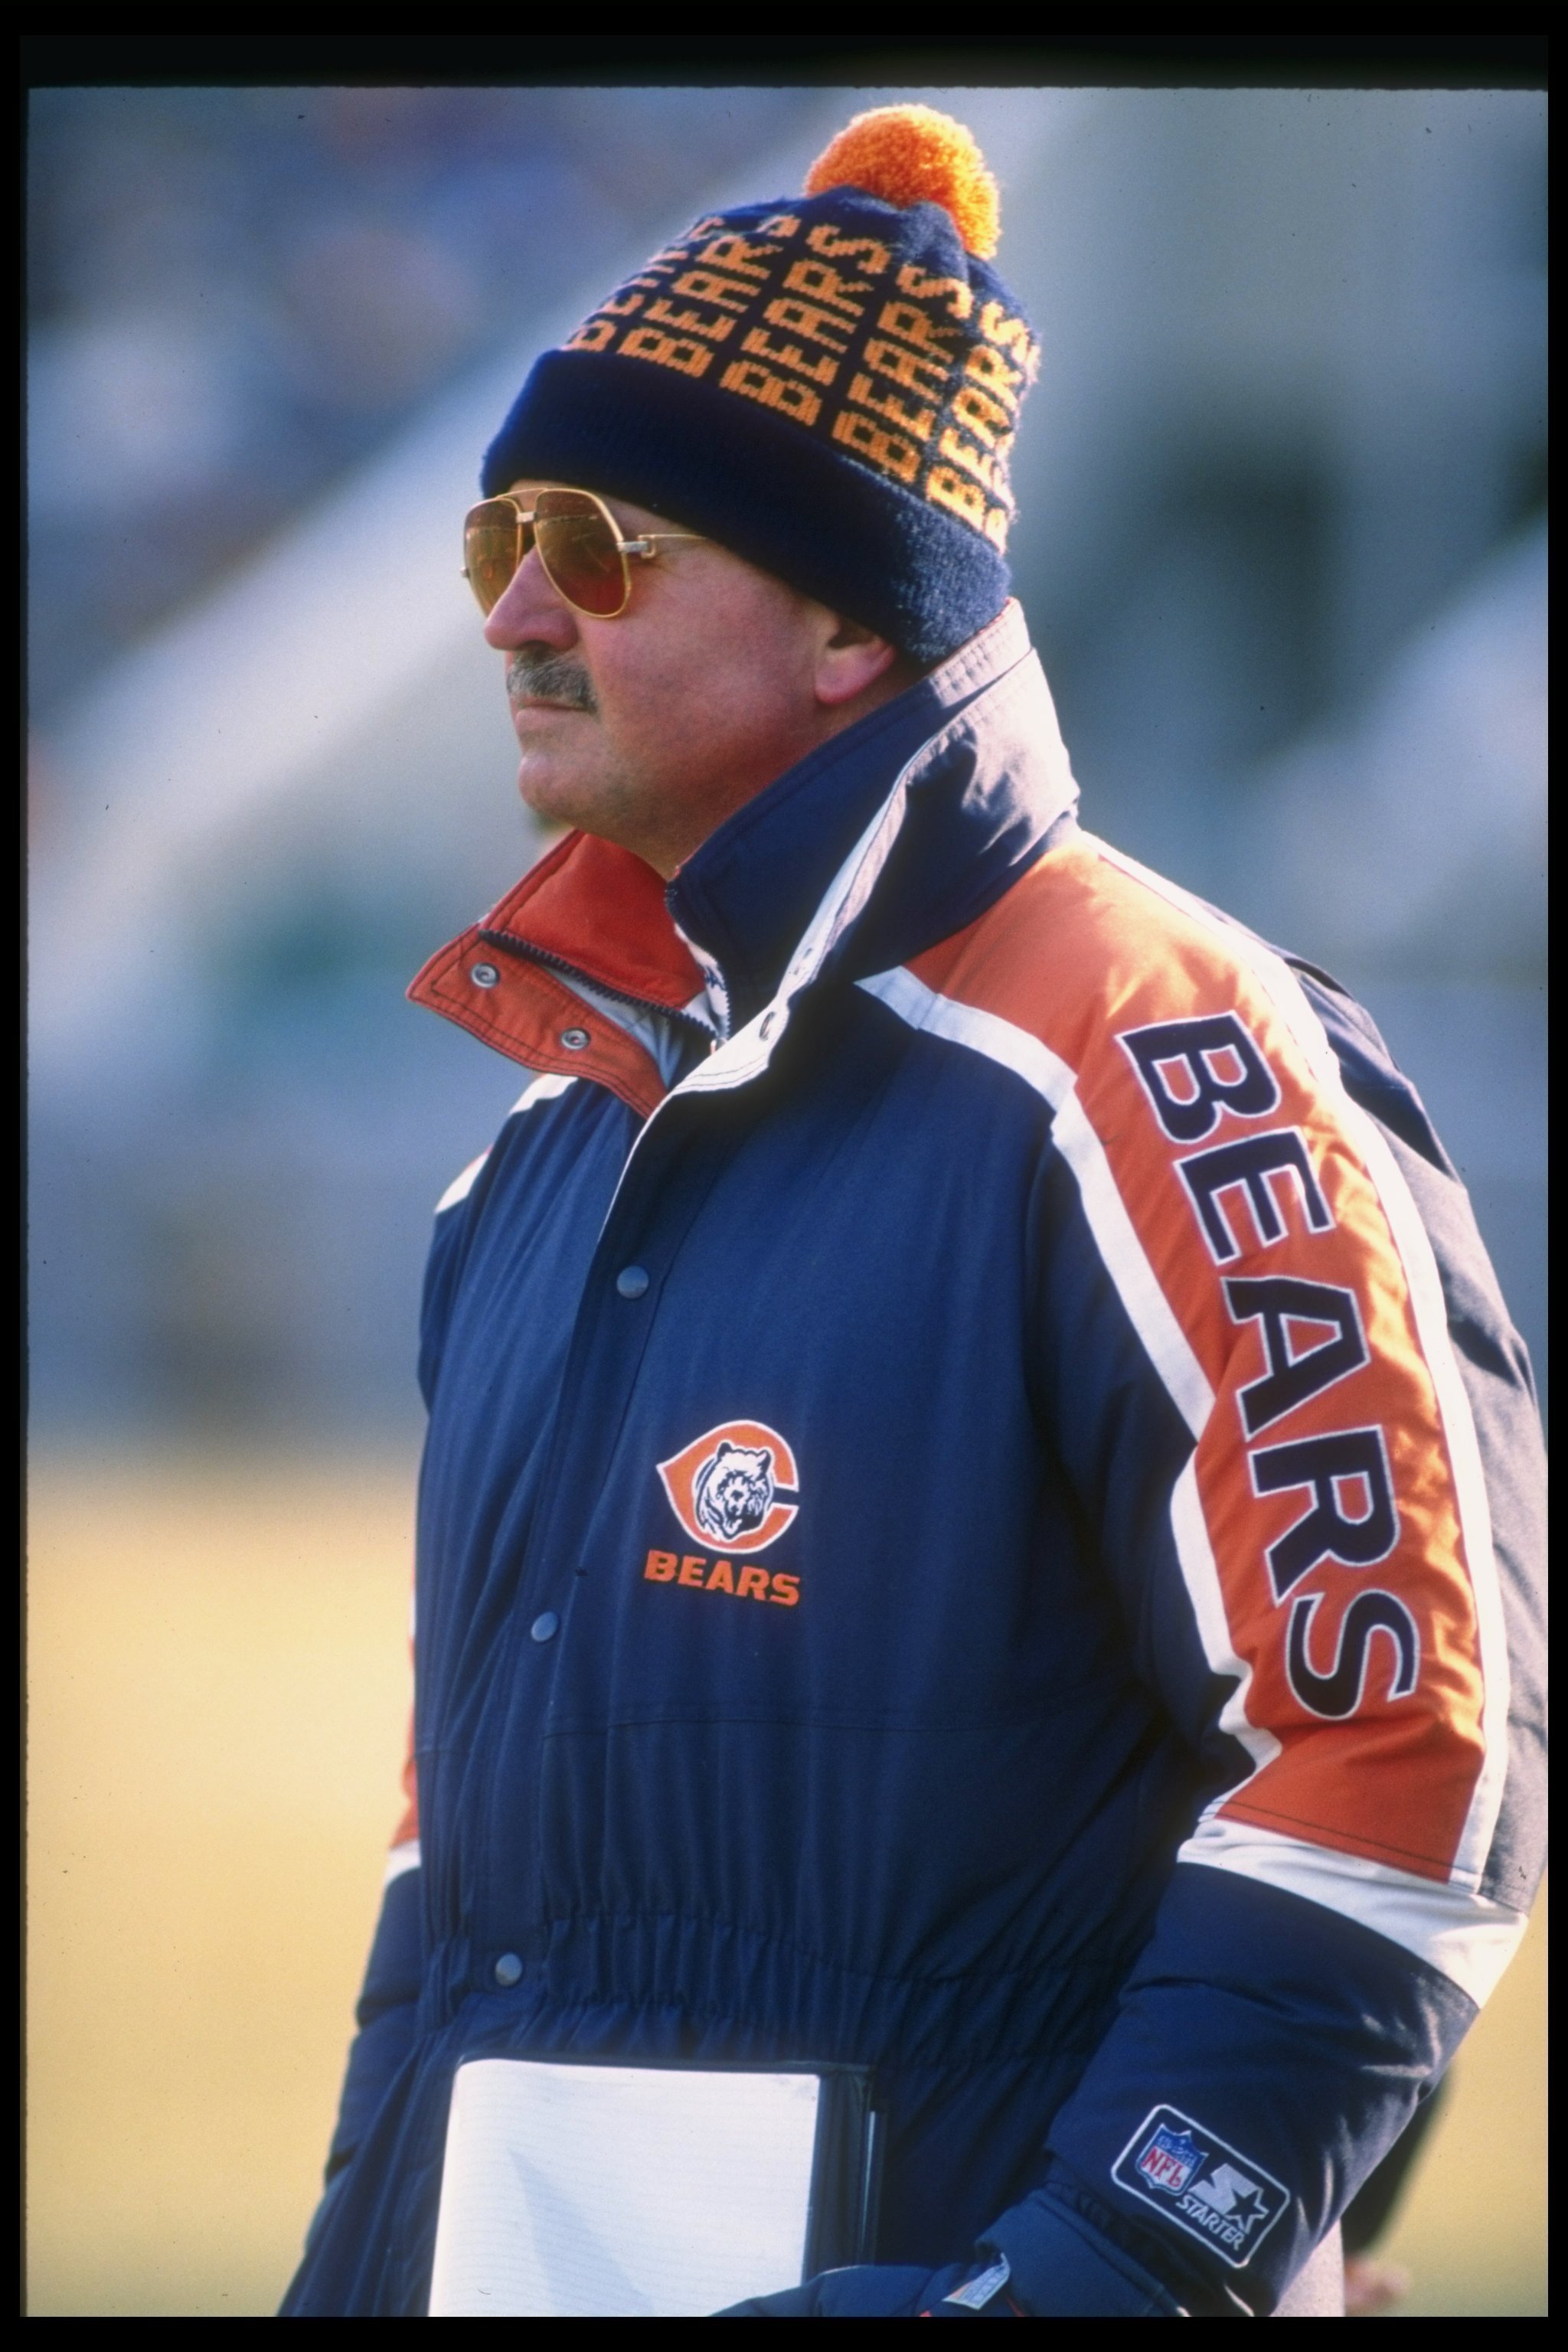 Mike Ditka's Chicago Bears Jersey and Sweater Retirement